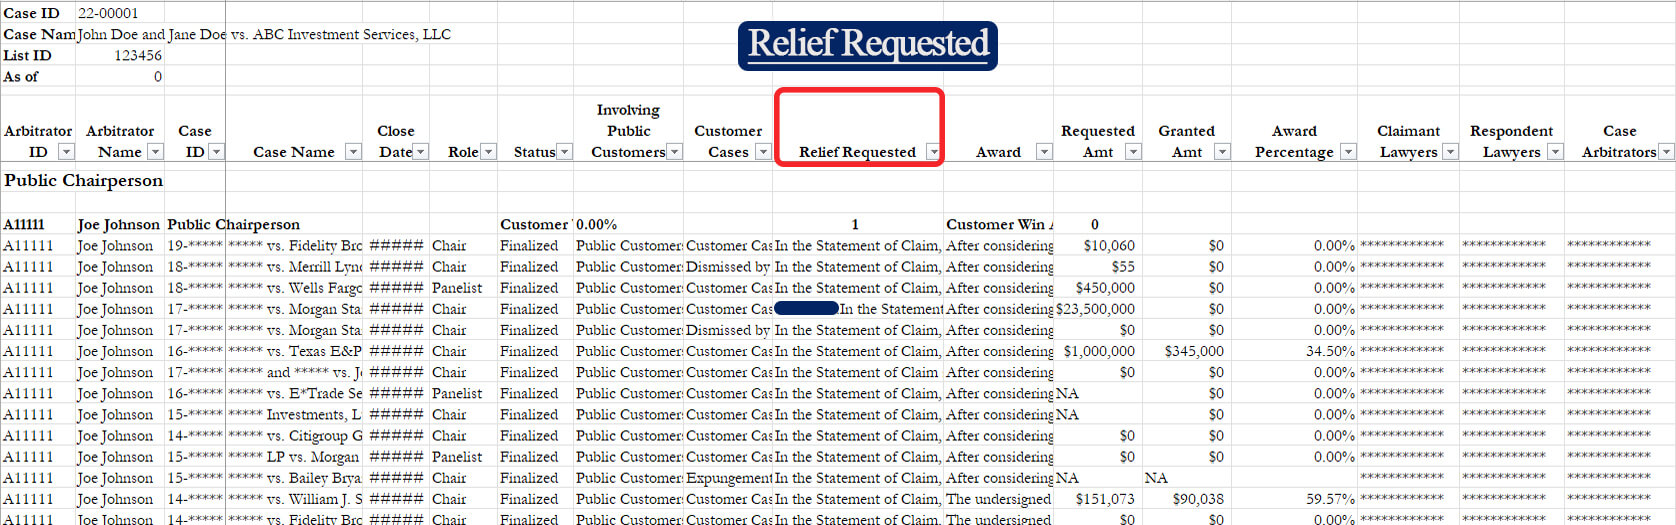 A screenshot highlighting the relief requested column on the cases page of our arbitrator ranking excel file.